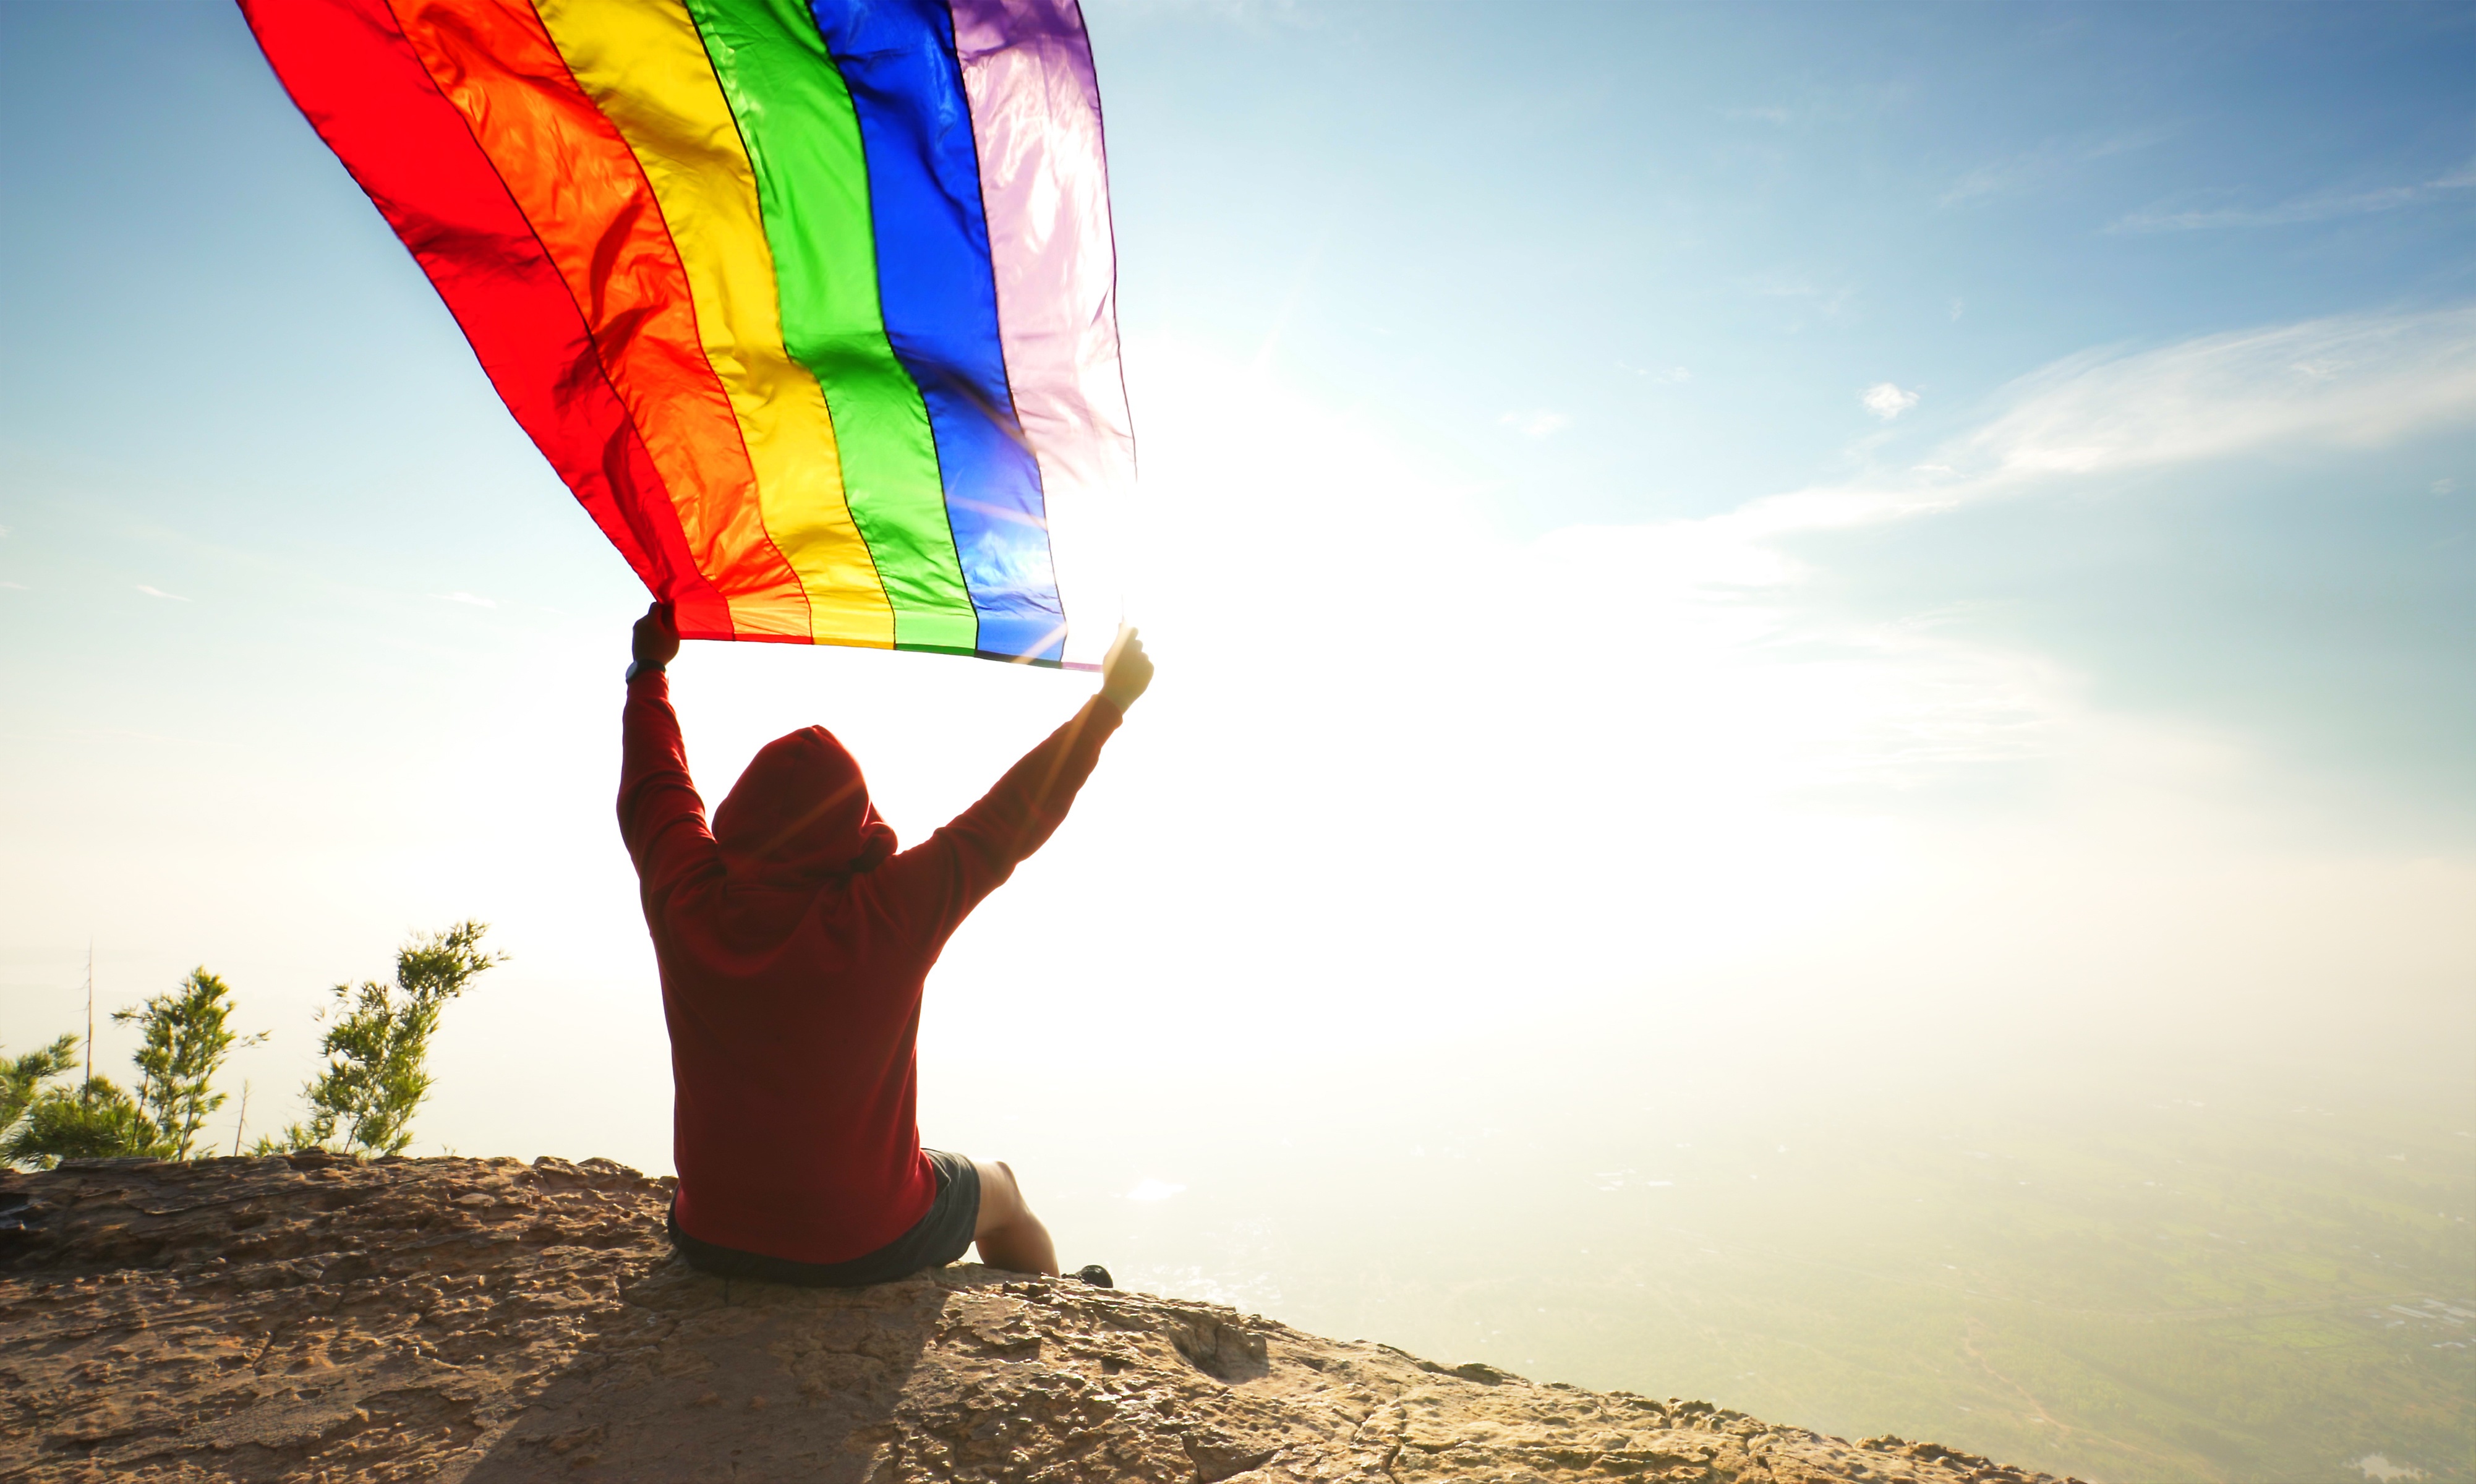 man with a Flying LGBT flag